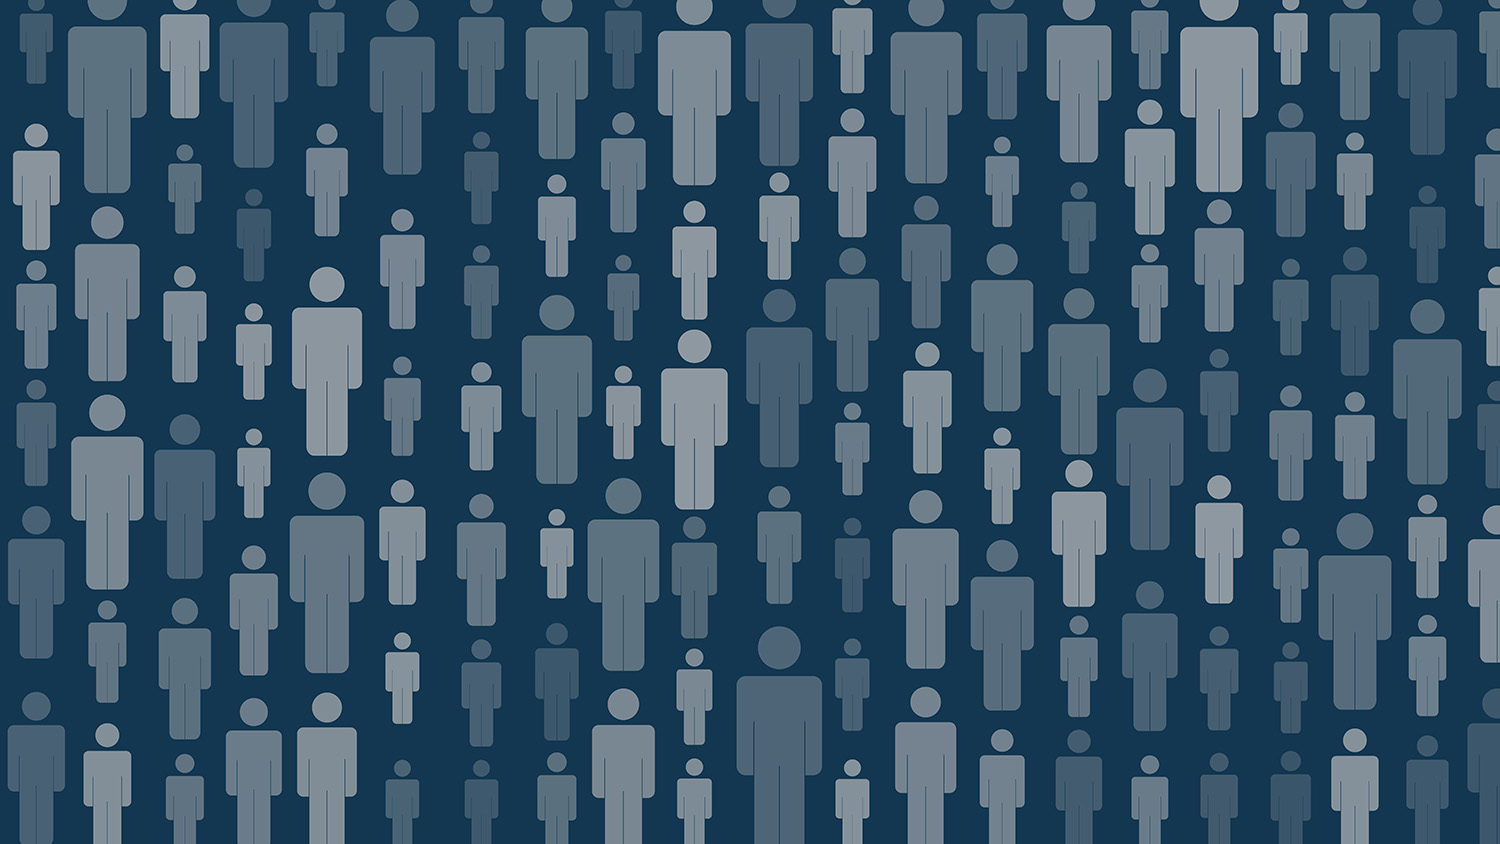 Large group of abstract people icons.